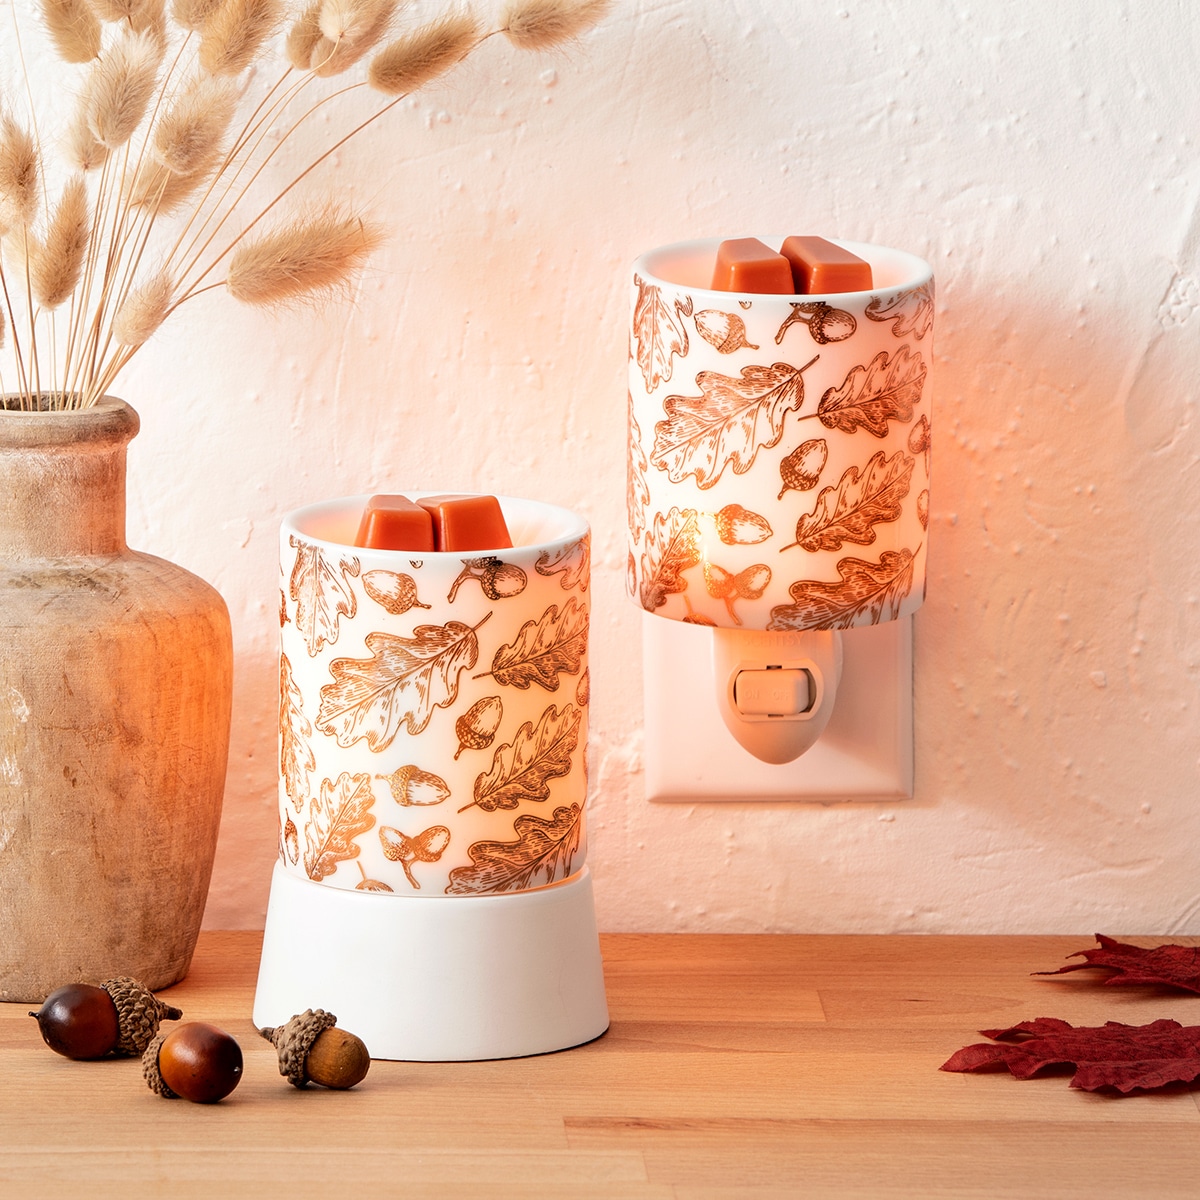 Fall Foliage Scentsy Mini Warmer With Tabletop Base